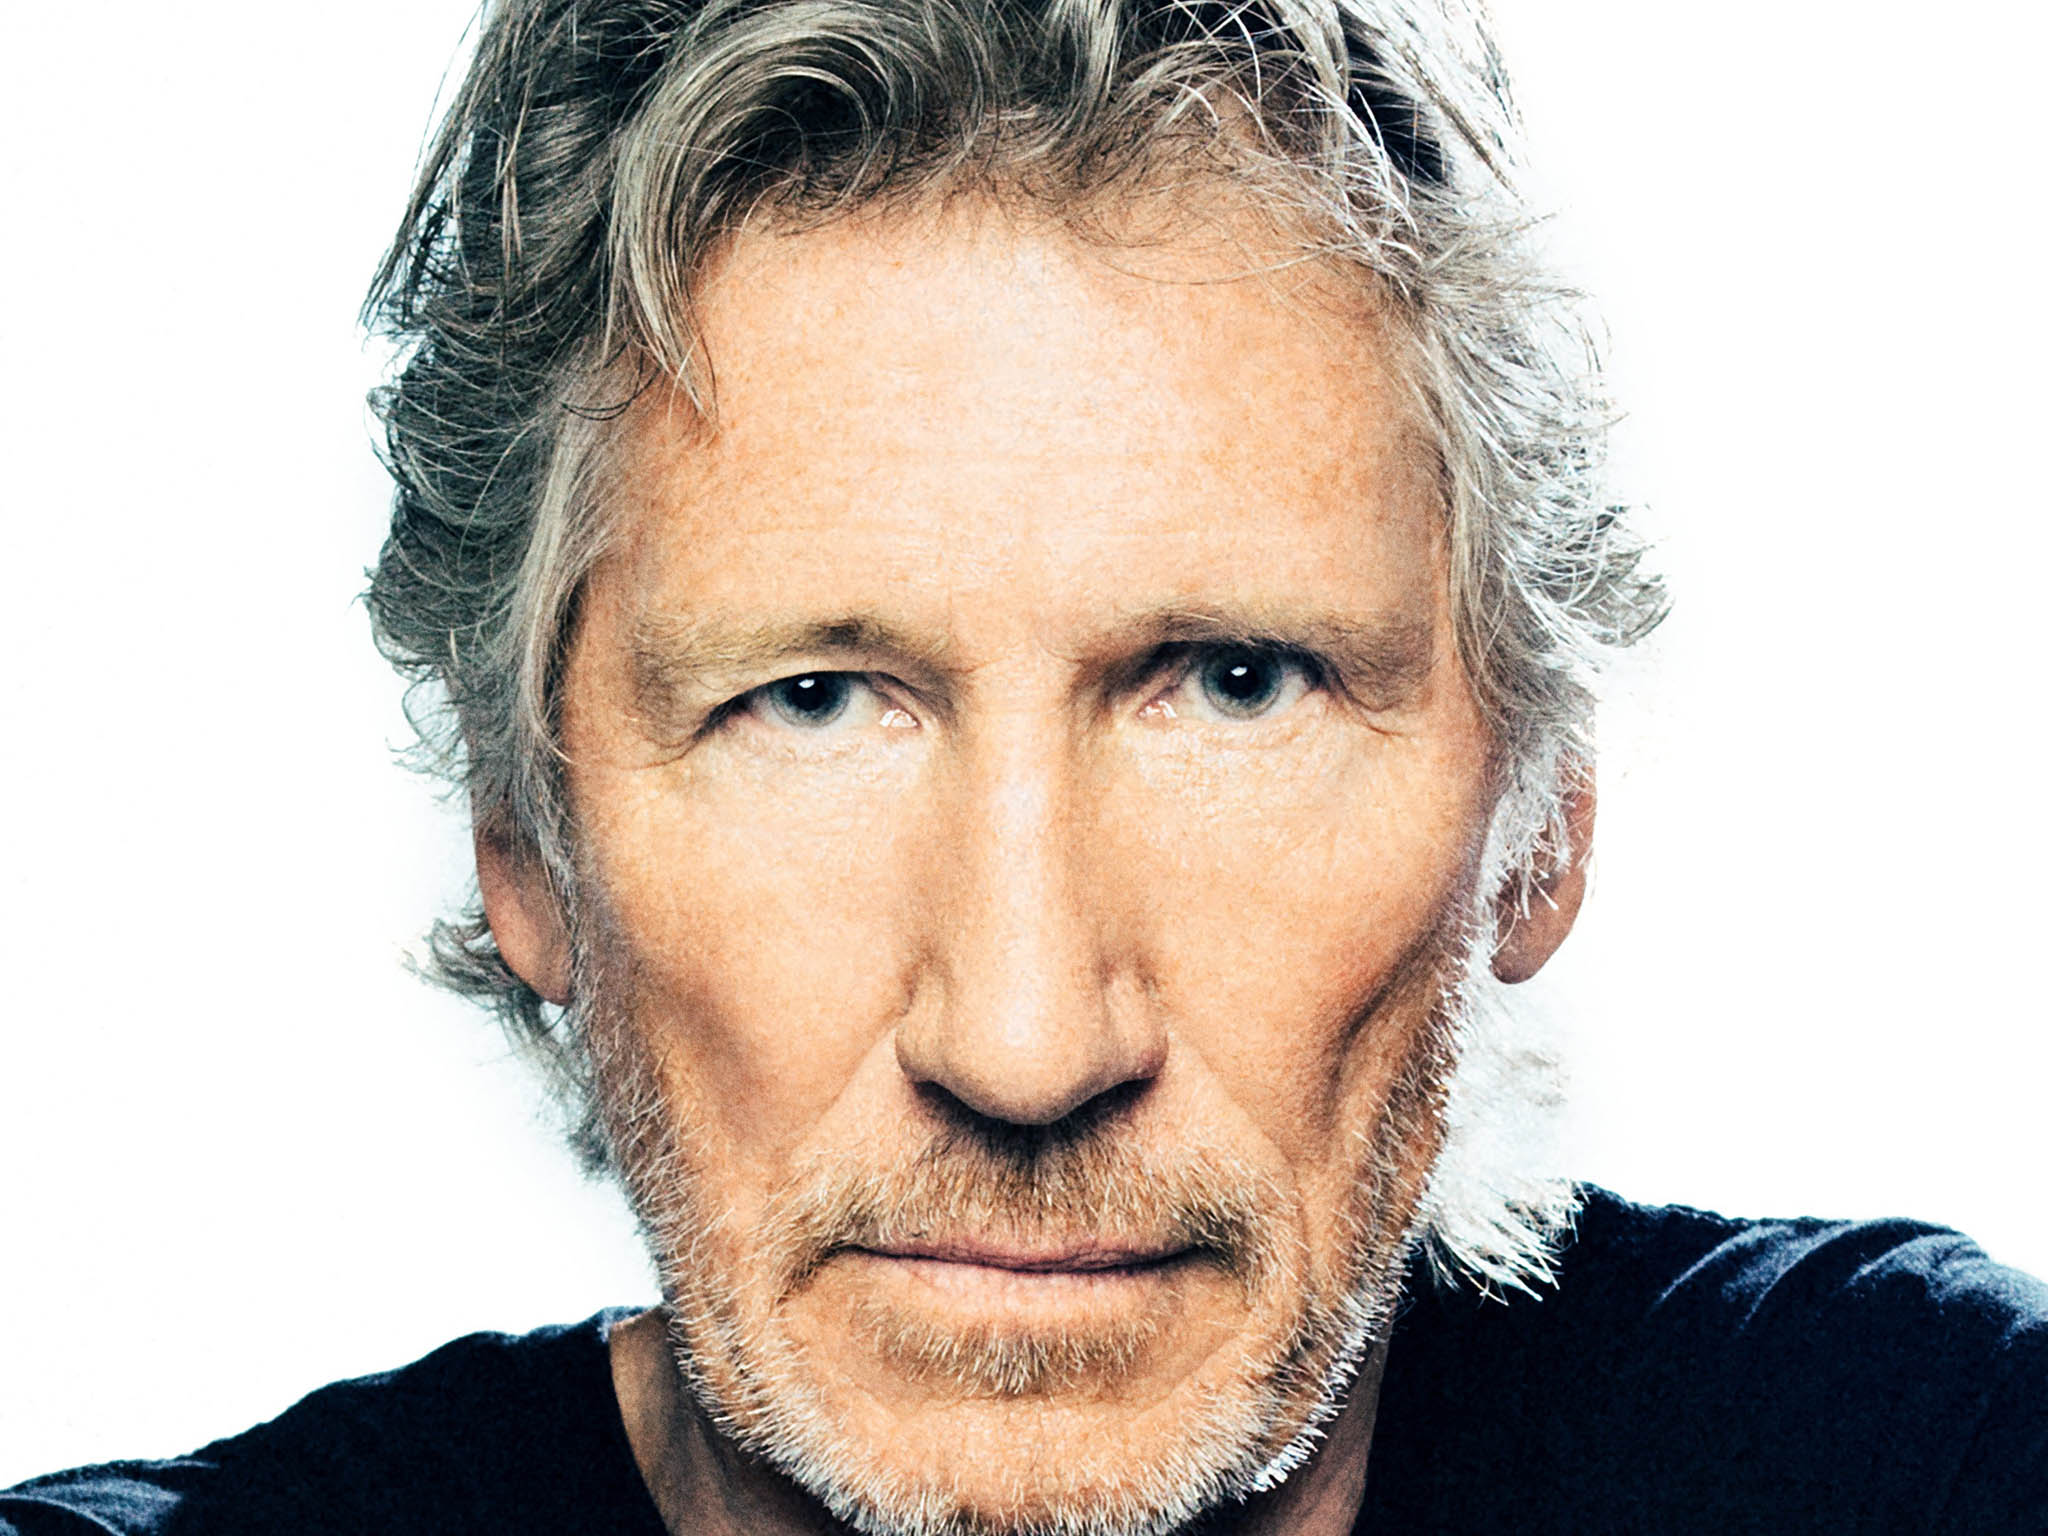 Roger Waters free press image